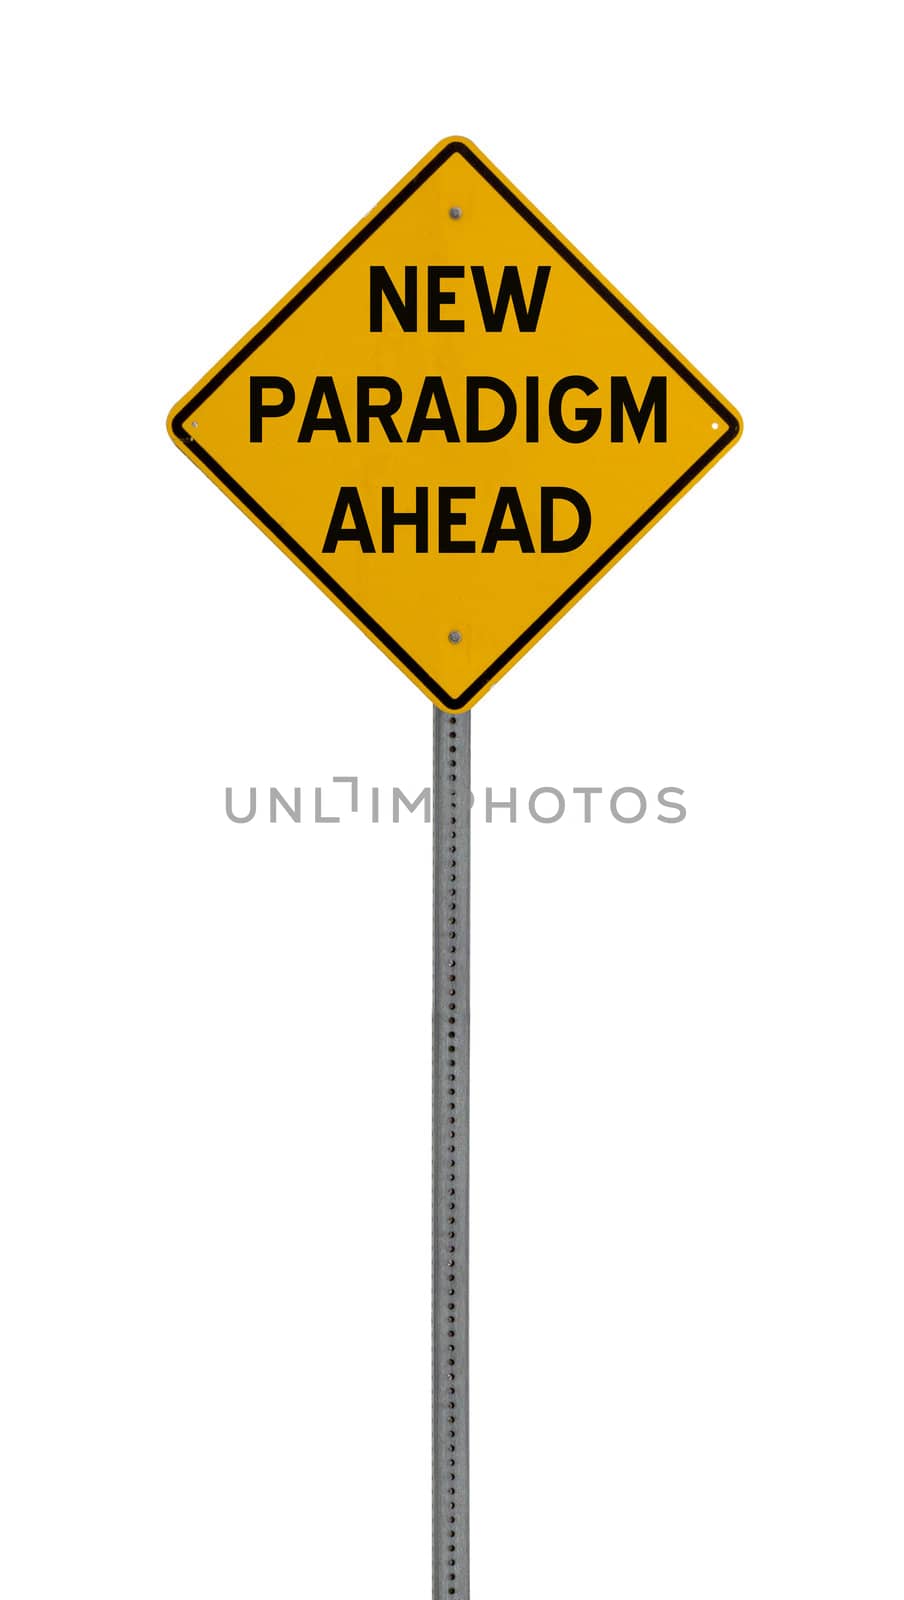  new paradigm shift ahead - Yellow road warning sign by jeremywhat